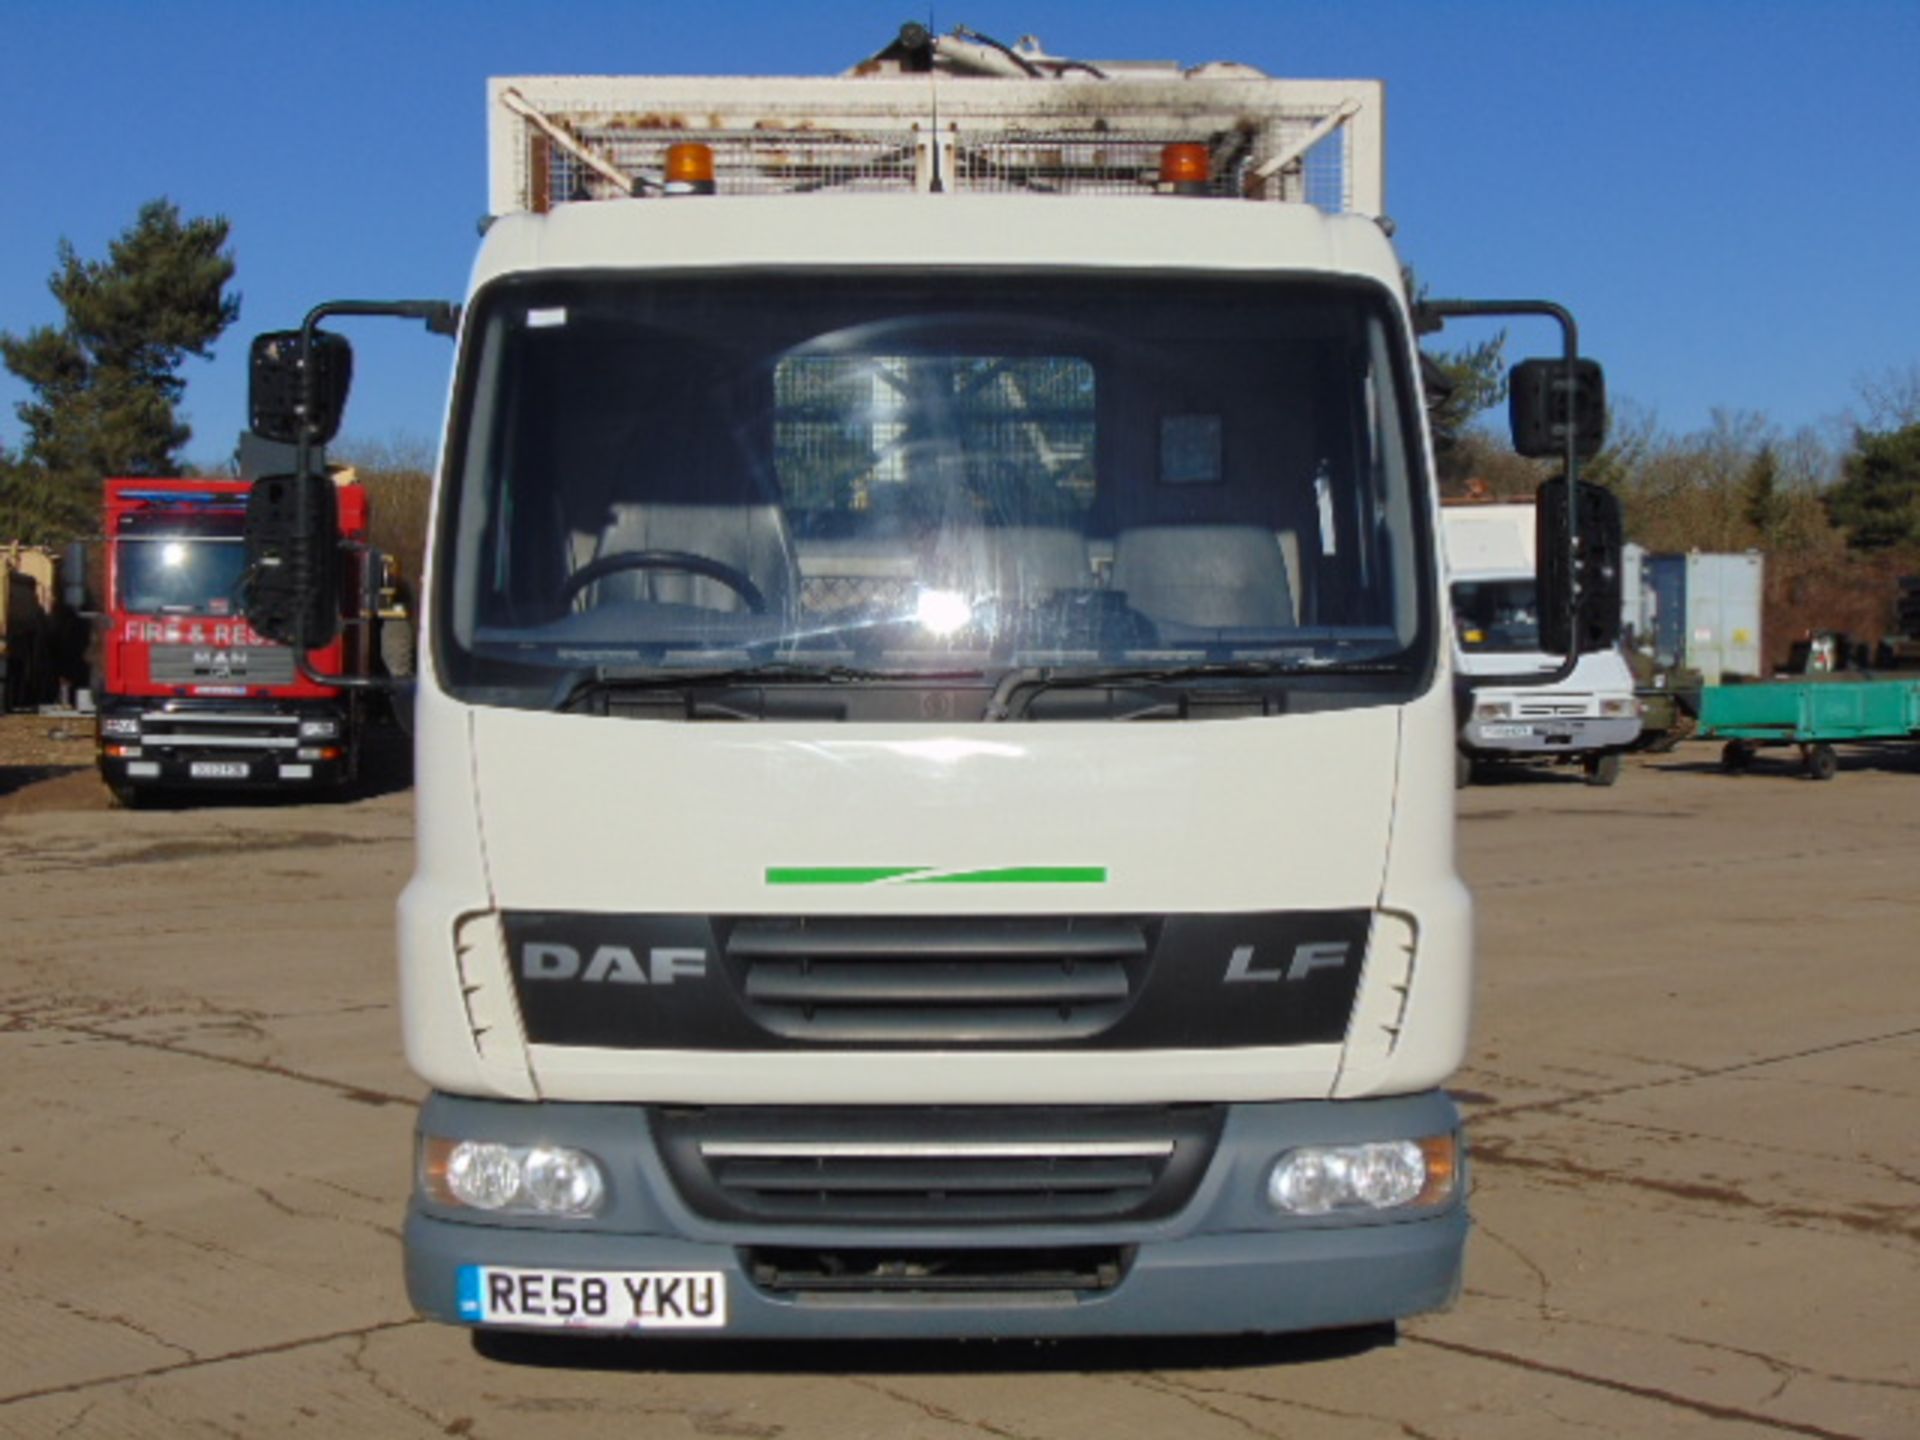 2008 DAF LF 45.140 C/W Refuse Cage, Rear Tipping Body and Side Bin Lift - Image 2 of 26